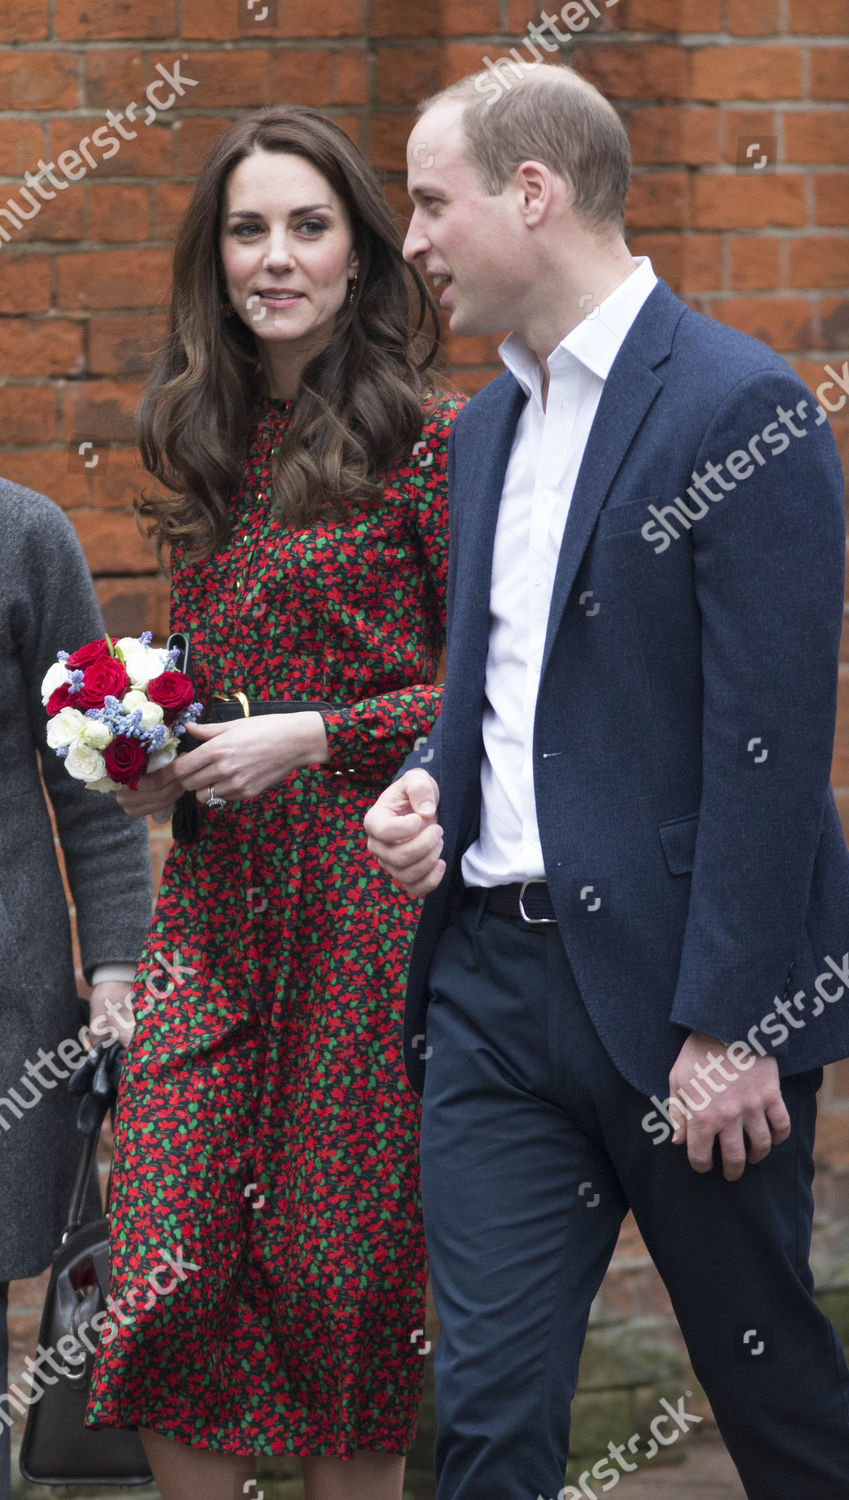 royal-visit-to-youth-support-service-the-mix-london-uk-shutterstock-editorial-7583001v.jpg